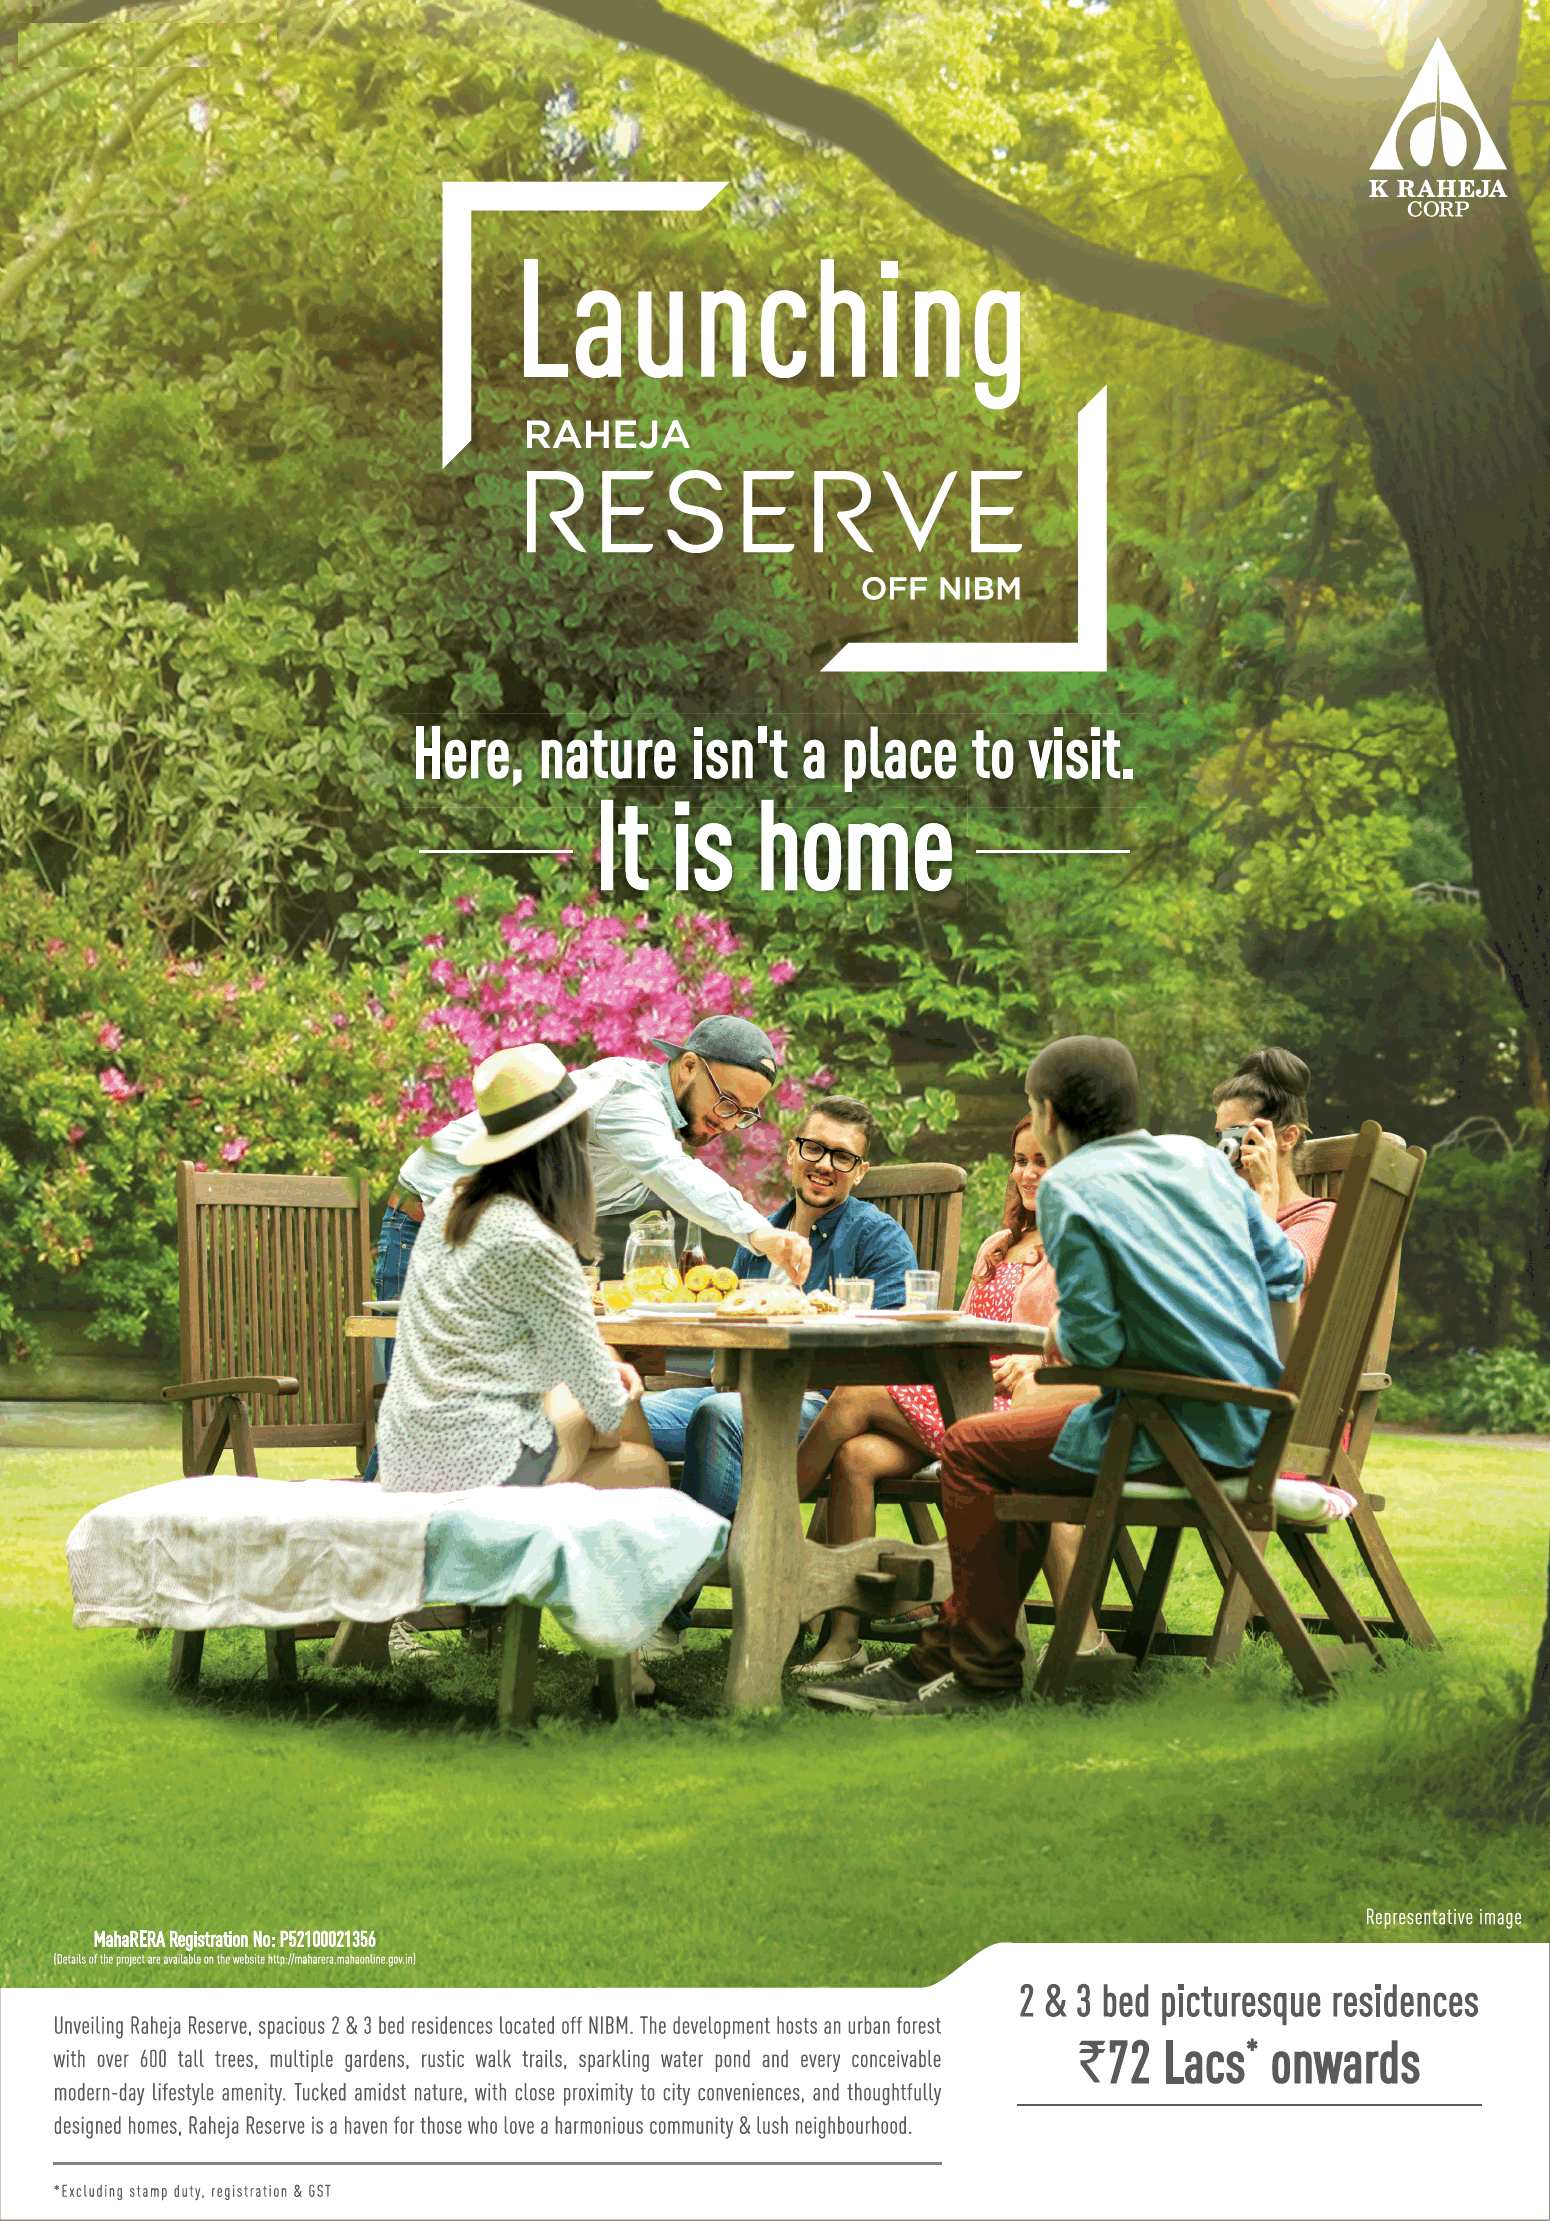 Book 2 & 3 Bed picturesque residences Rs 72 Lacs at Raheja Reserve in Pune Update